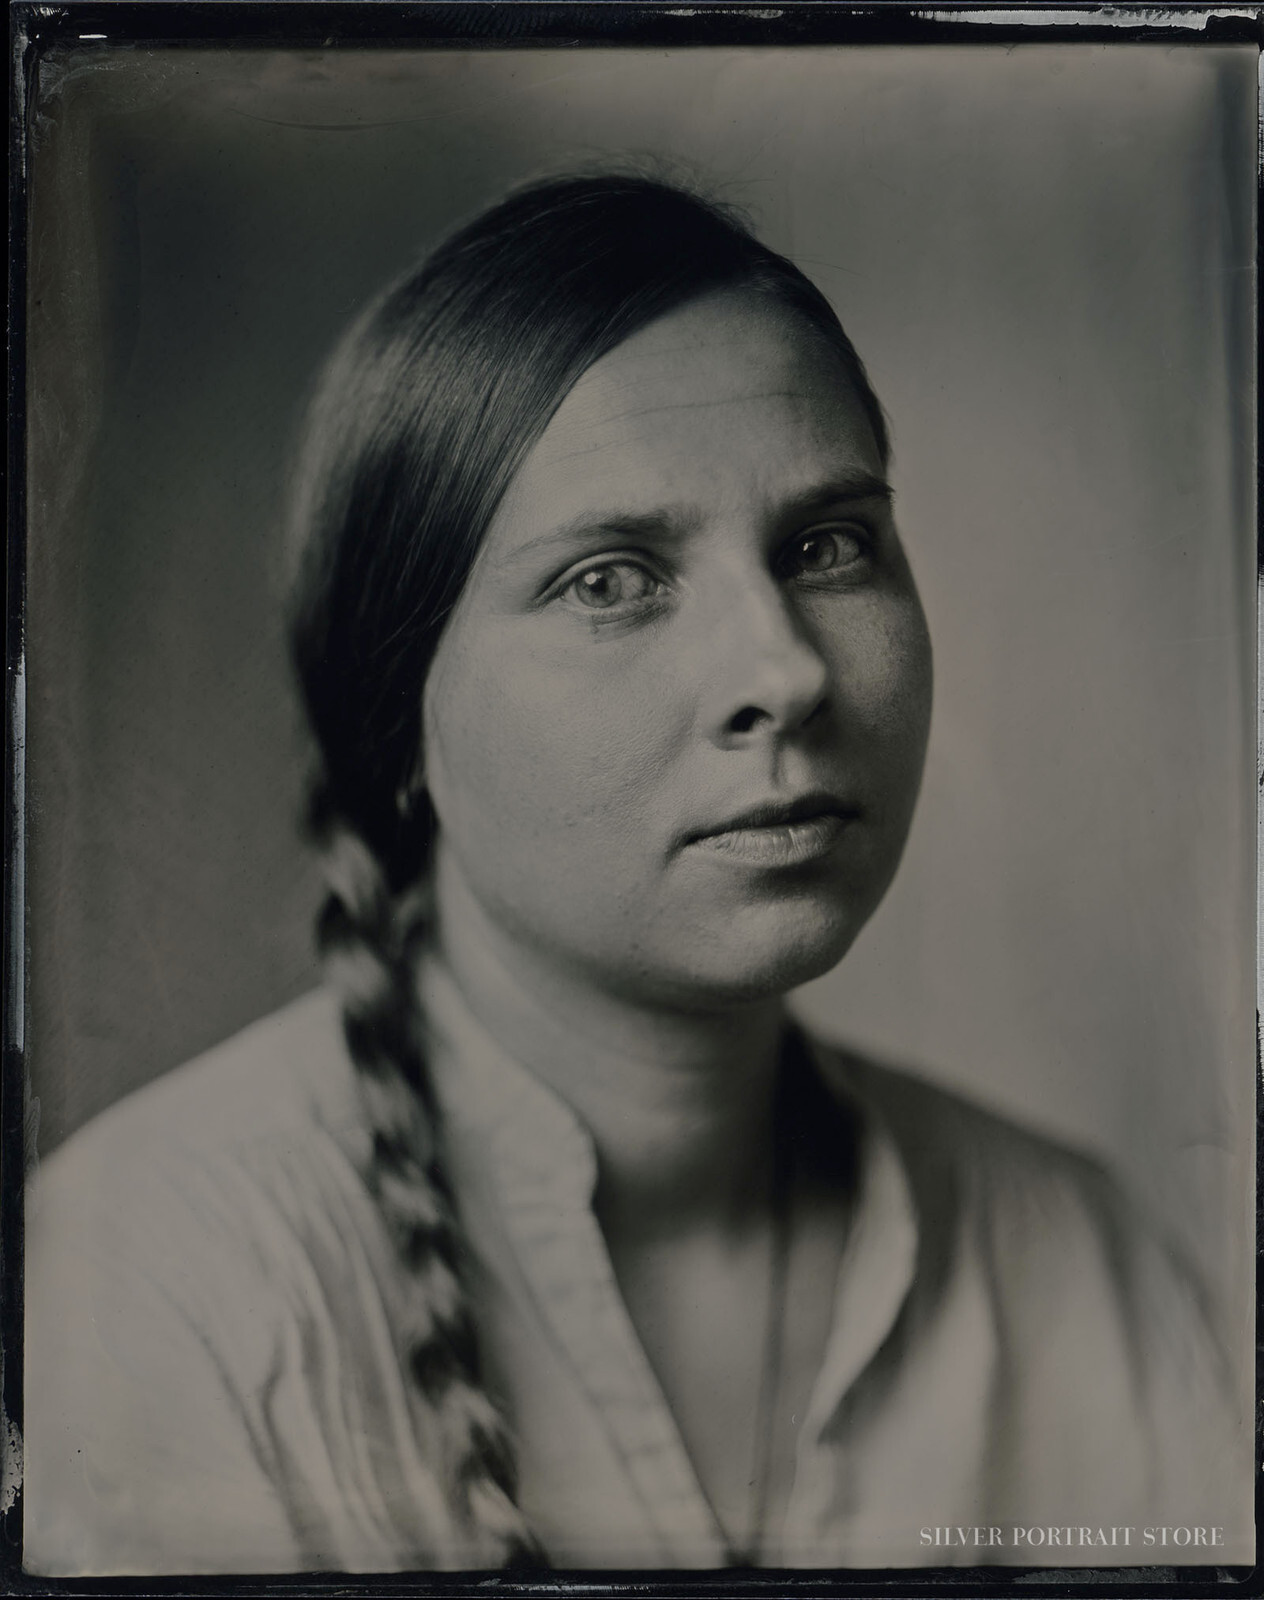 Anna-Silver Portrait Store-scan from Wet plate collodion-Tintype 10 x 12 cm.